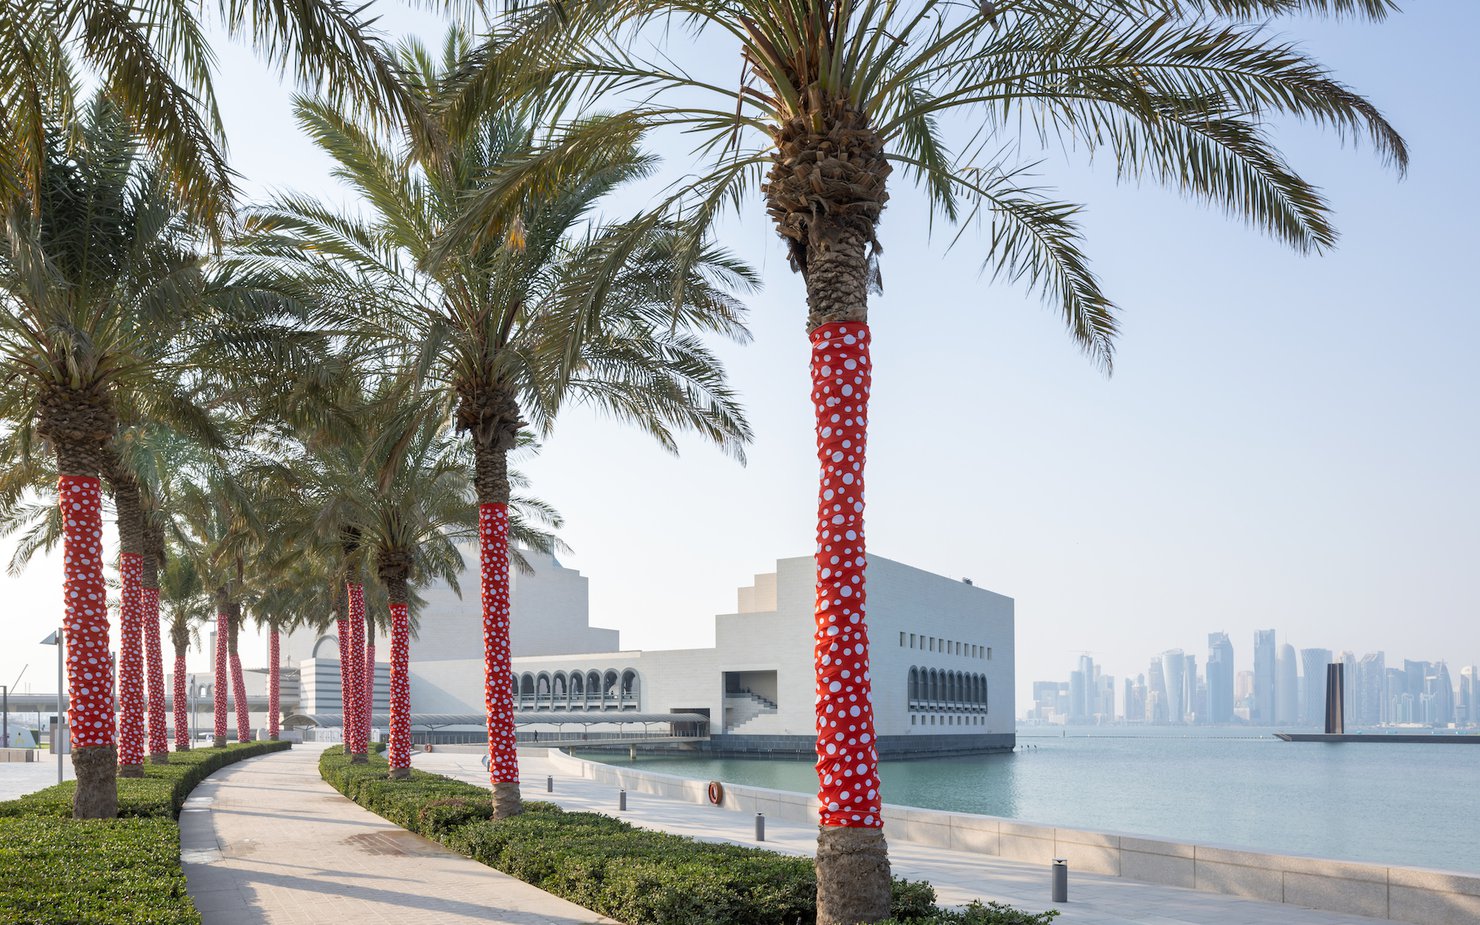 Palm trees wrapped in red and white polka dot material line a path on the water leading up to a white building.